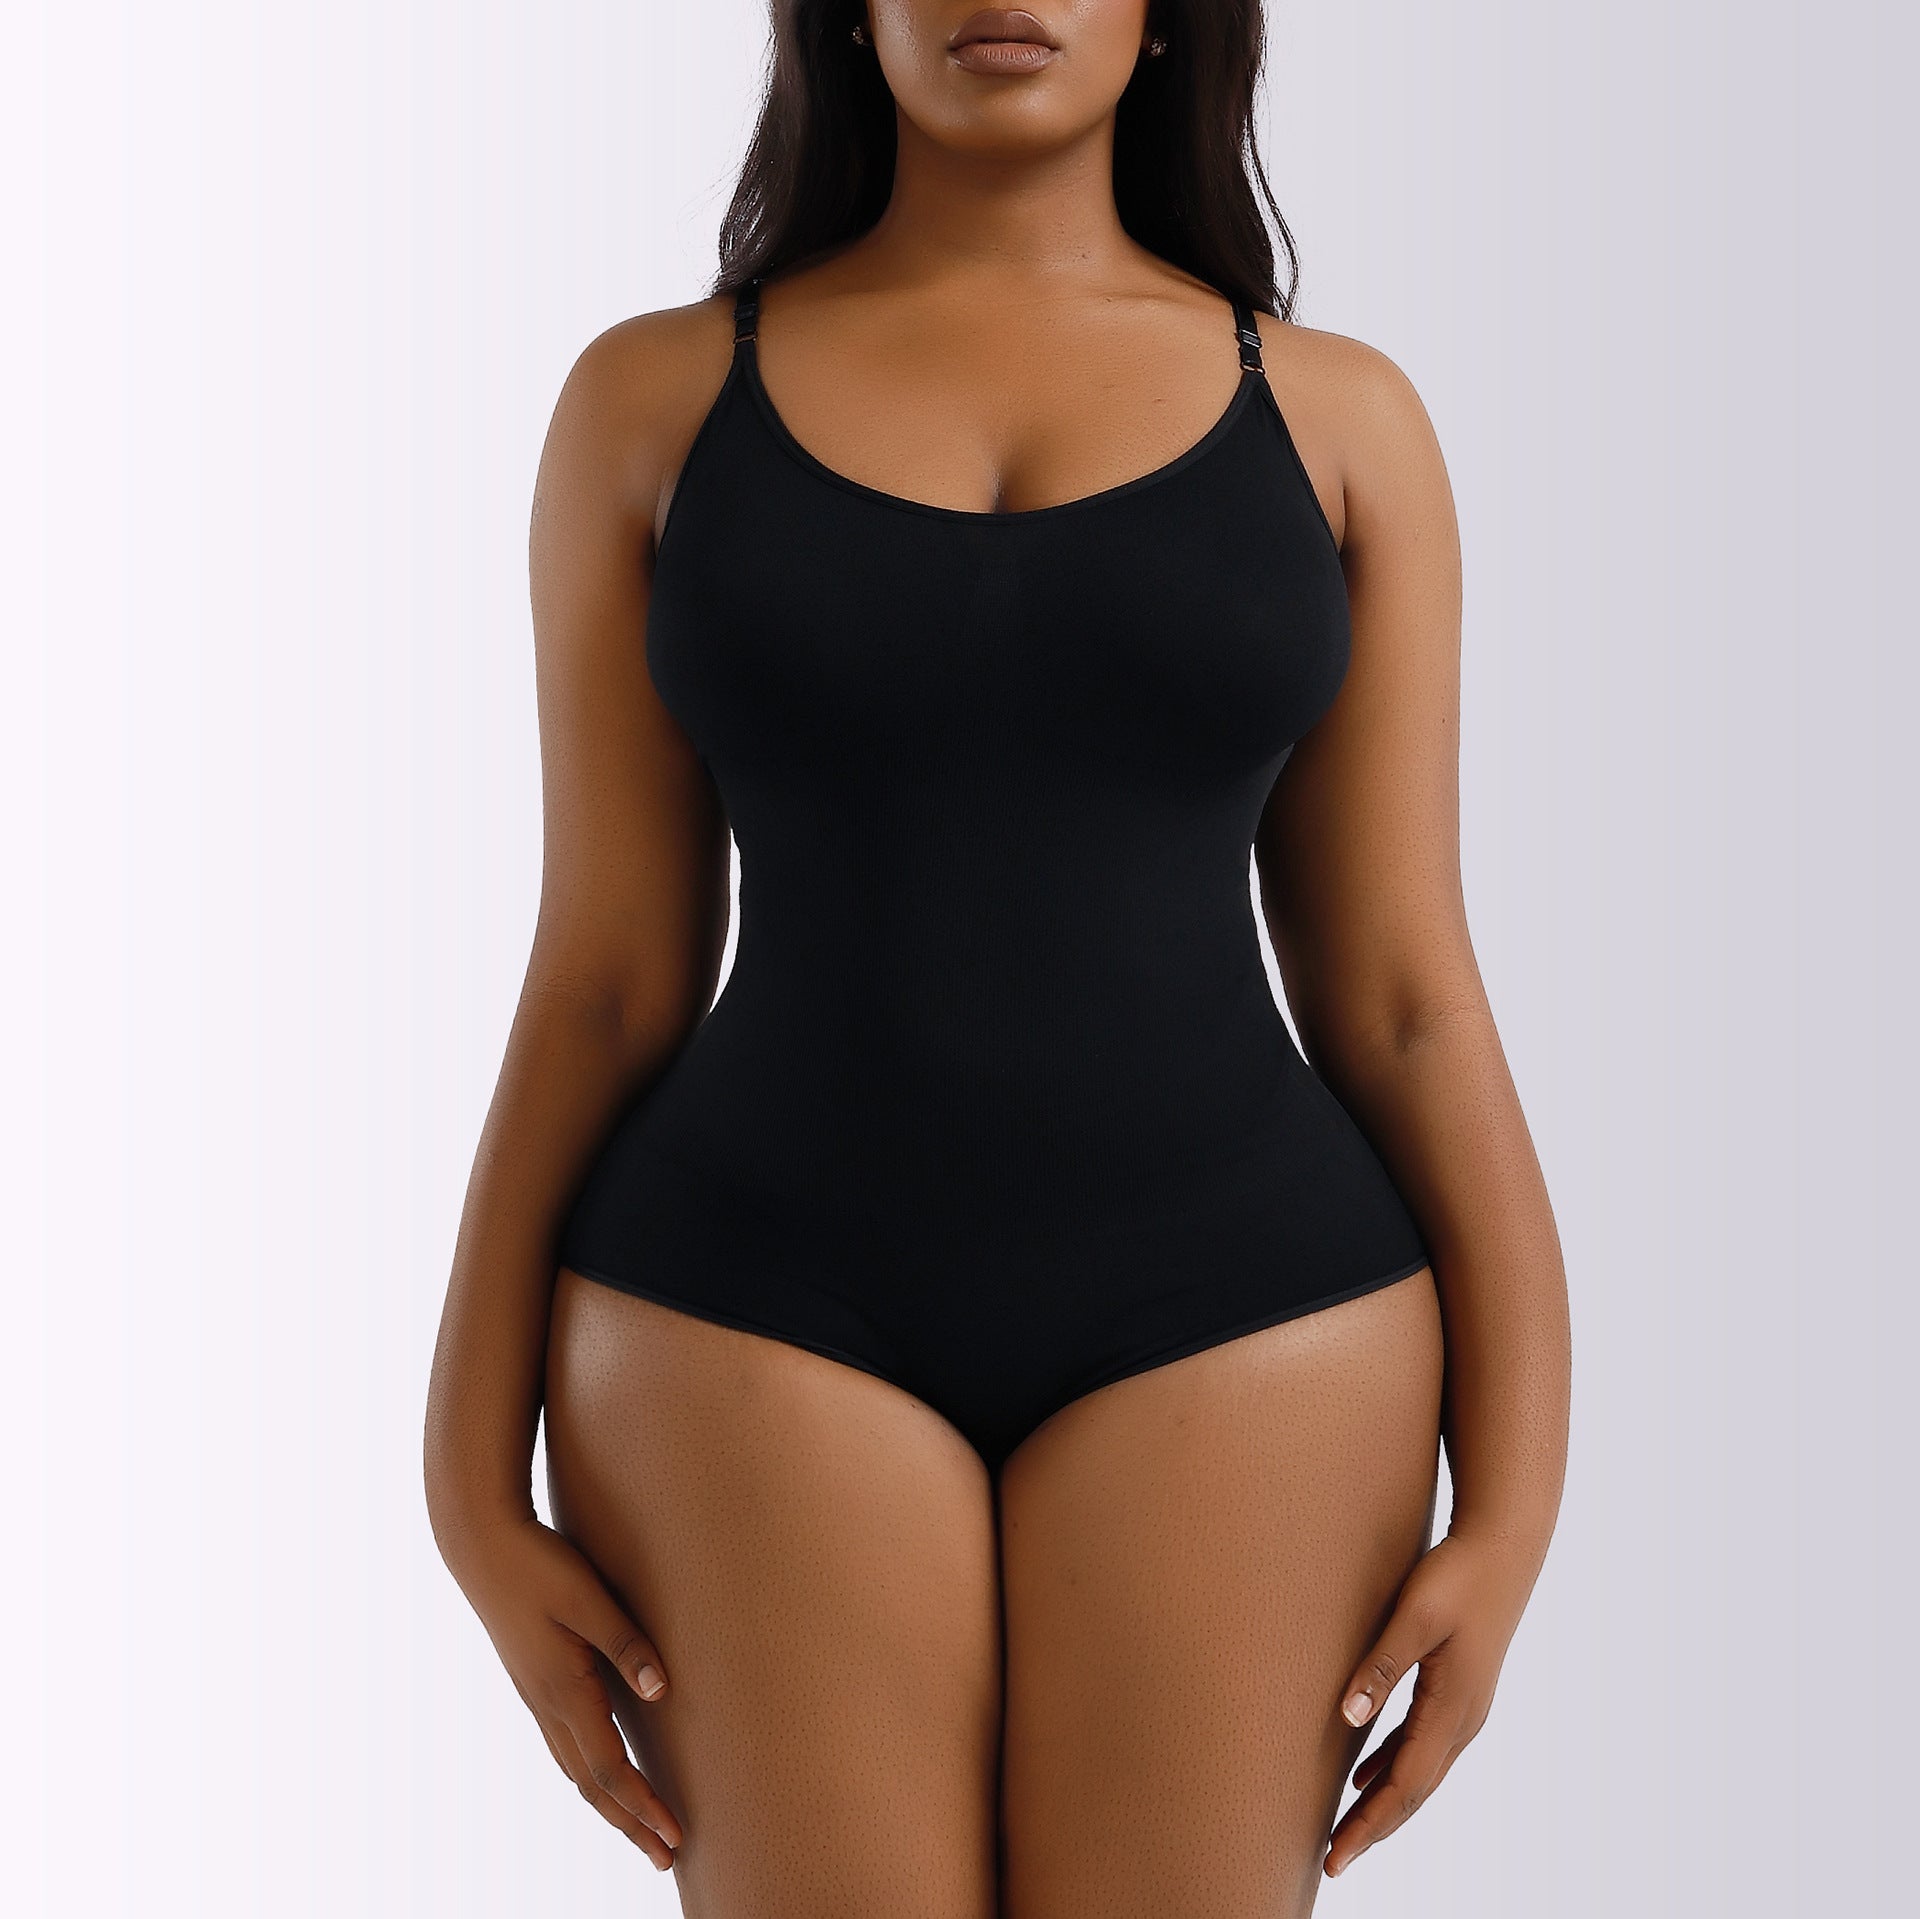 a woman in a black bodysuit posing for the camera